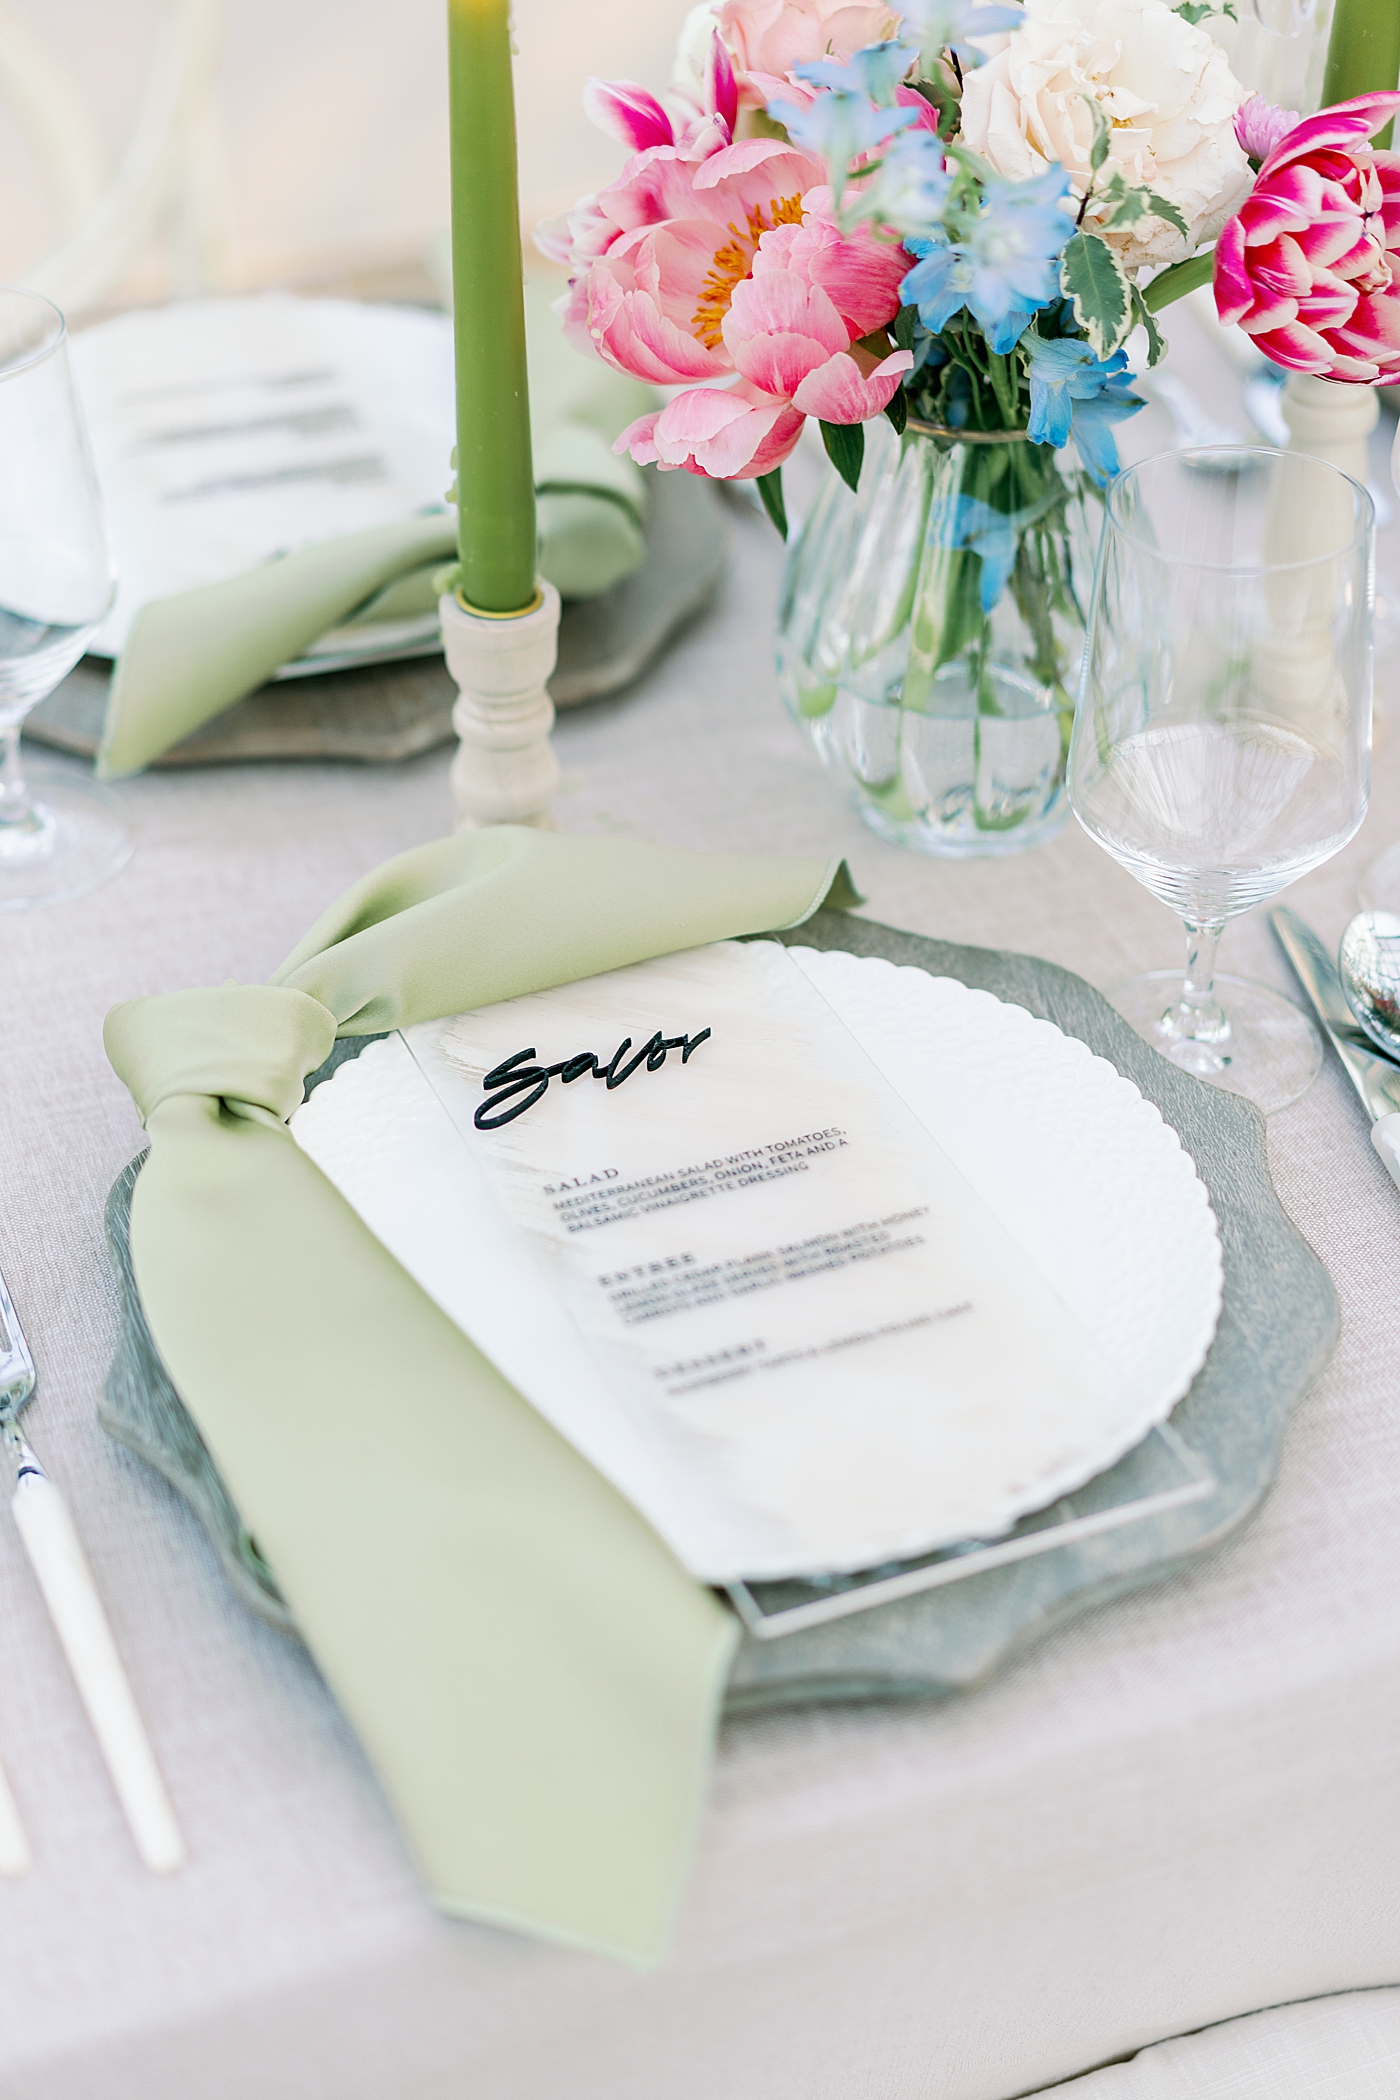 Custom menu and table setting with green pillar candles | Photo by Annie Laura Photo